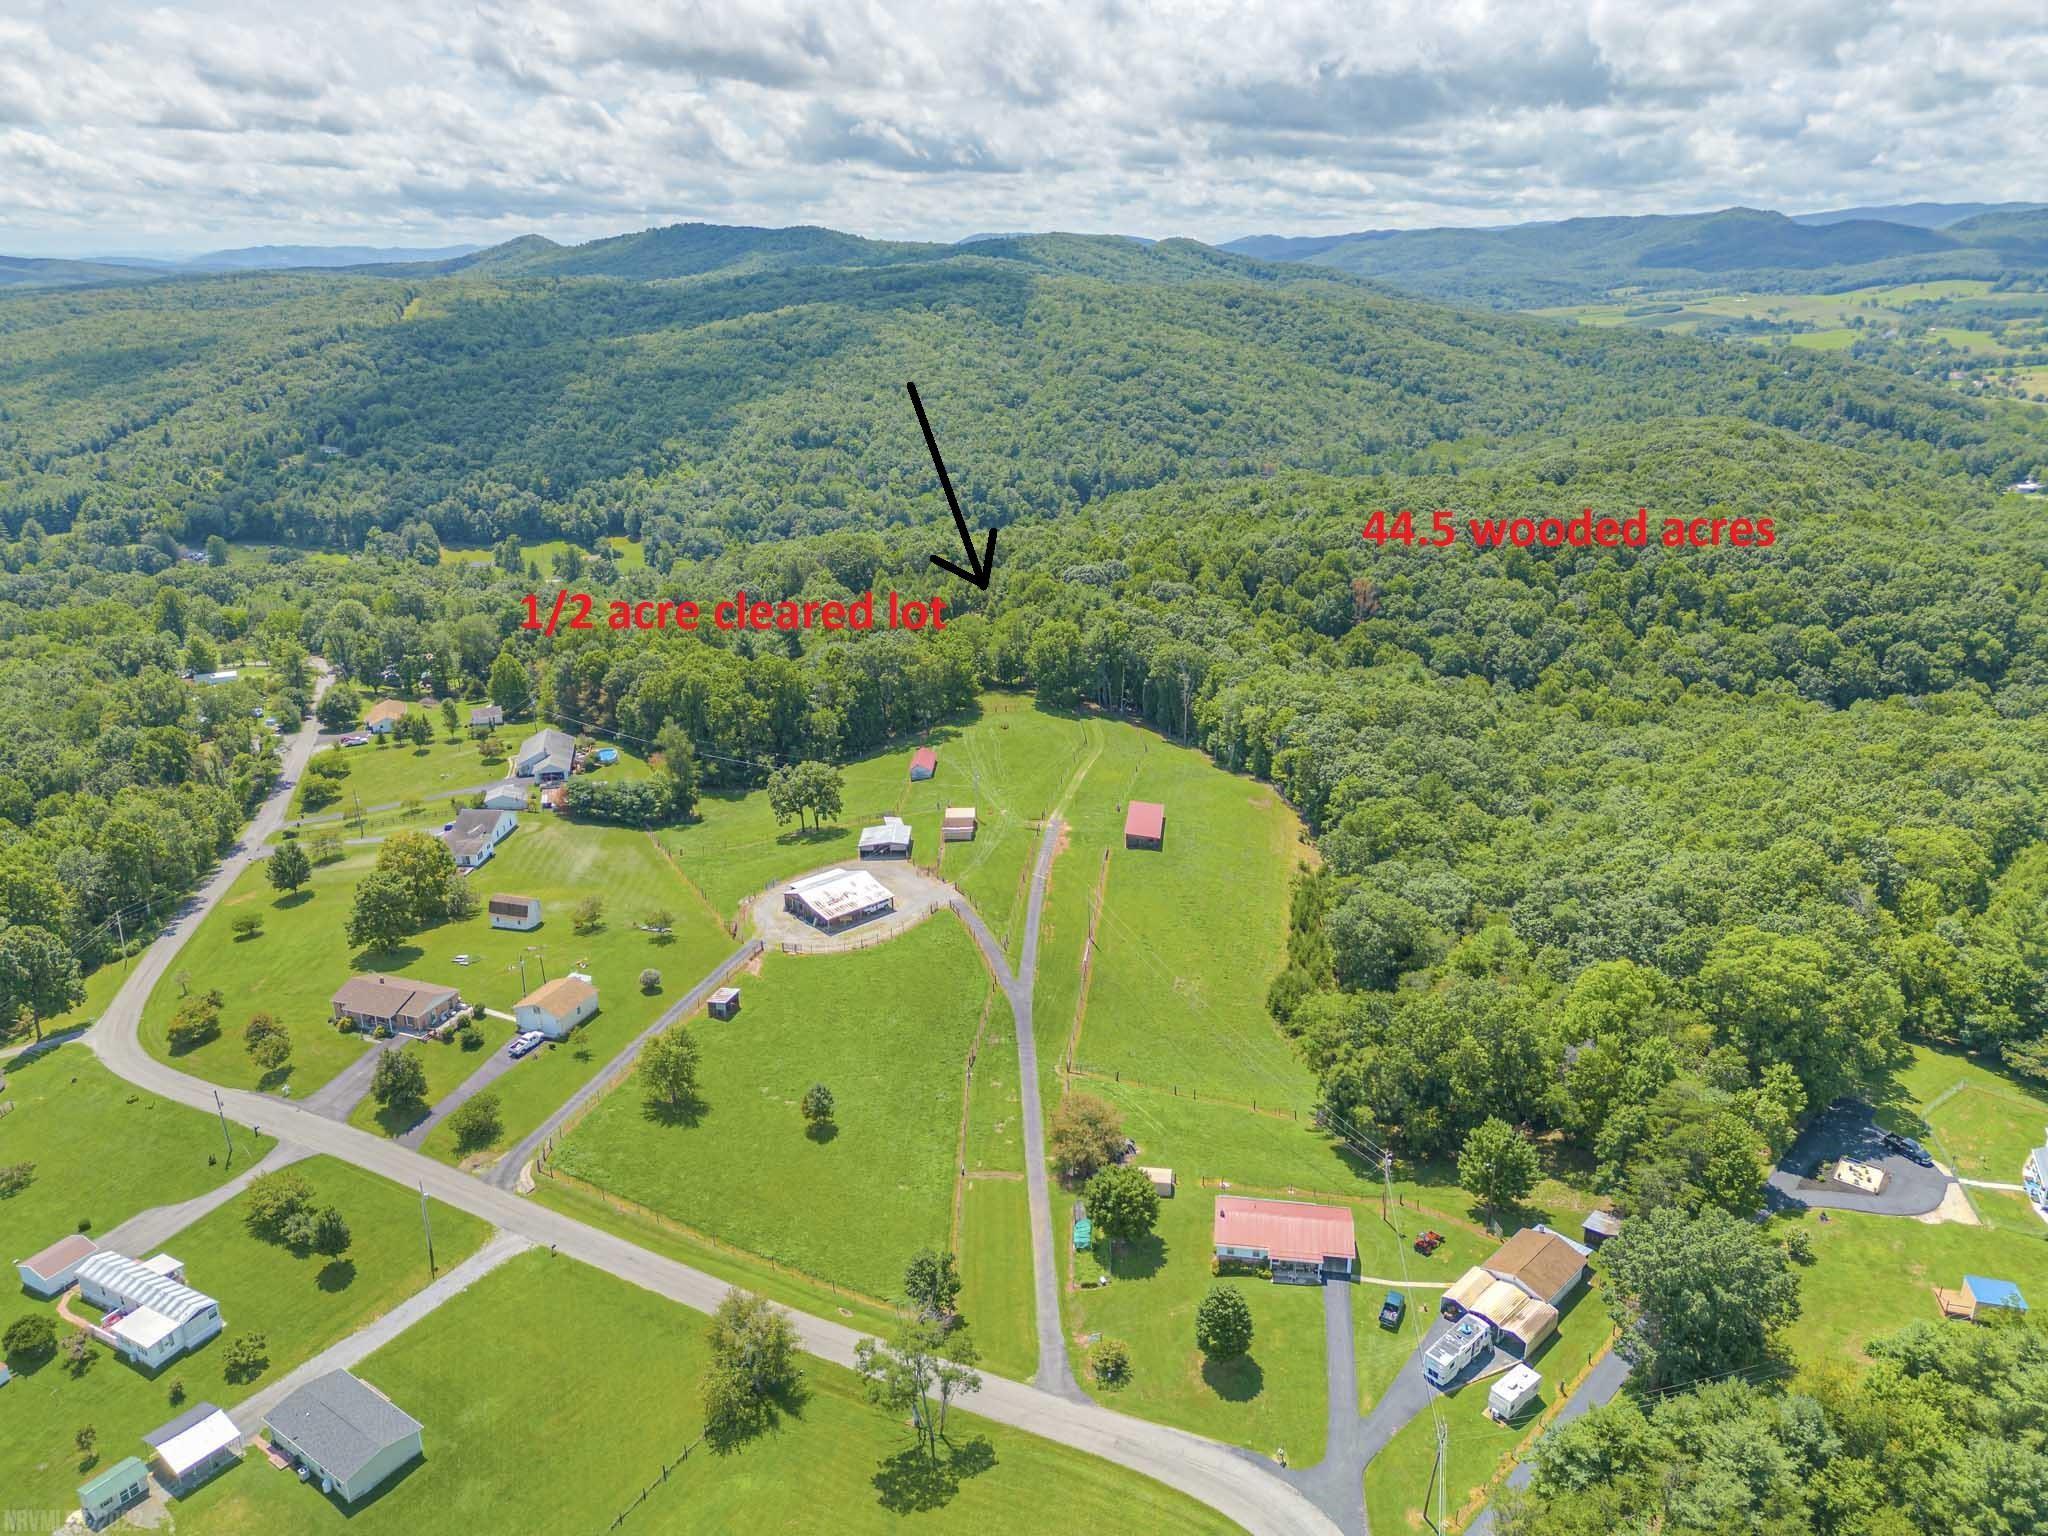 Looking to build your perfect home in a private setting?  Look no further! This property is made up of 2 tracts making up 45.27 acres that is accessed on Shrader Rd (deeded easement) and also borders Robinson Tract Rd.  A flat area (approx 1/2 acre) is already cleared to build your dream home! If a more secluded homesite is what you are looking for, pick a nice spot on the remaining 44.5 acres! The possibilities are endless!  Call a realtor today to walk with you through the many trails on the land.  Great area for your personal recreation including hiking, hunting and putting in ATV trails. Public water located on Shrader Hill Rd. There is a utility easement on the front of the property that borders Robinson Tract Rd. Check out the public documents for surveys and aerial GIS plat.